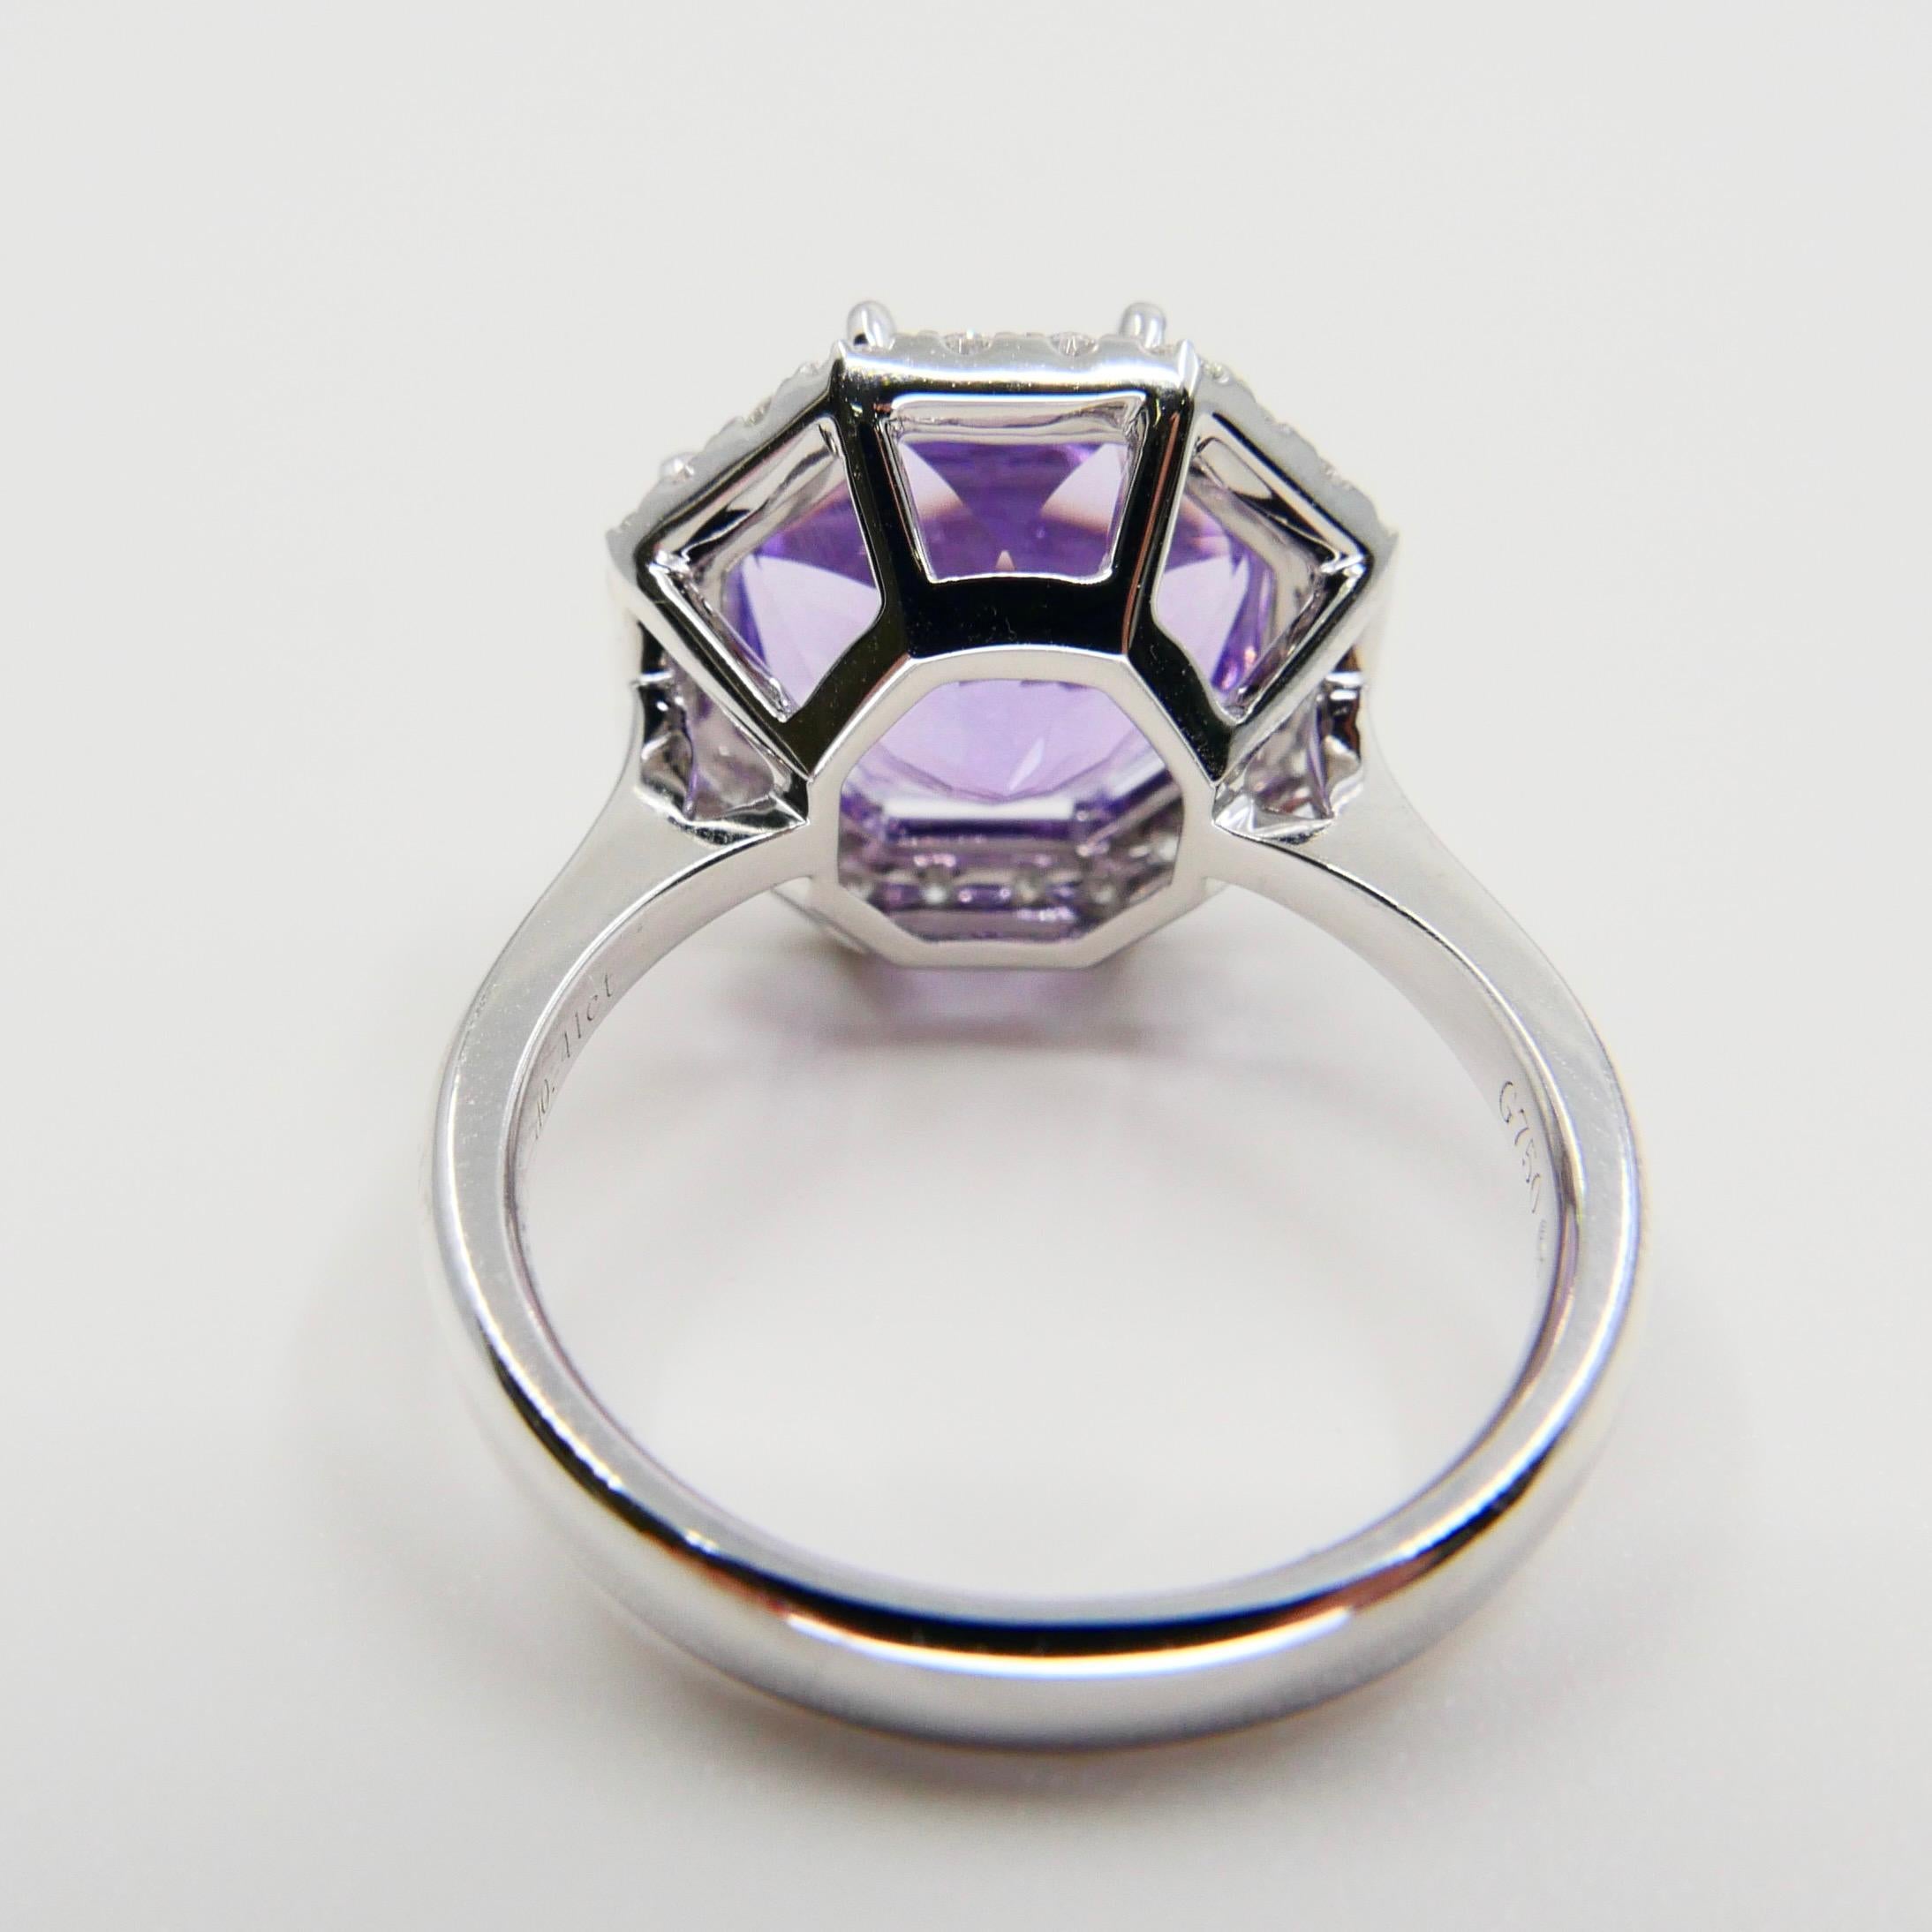 5.32 Carat Flower Cut Amethyst and Diamond Cocktail Ring, Statement Ring 5